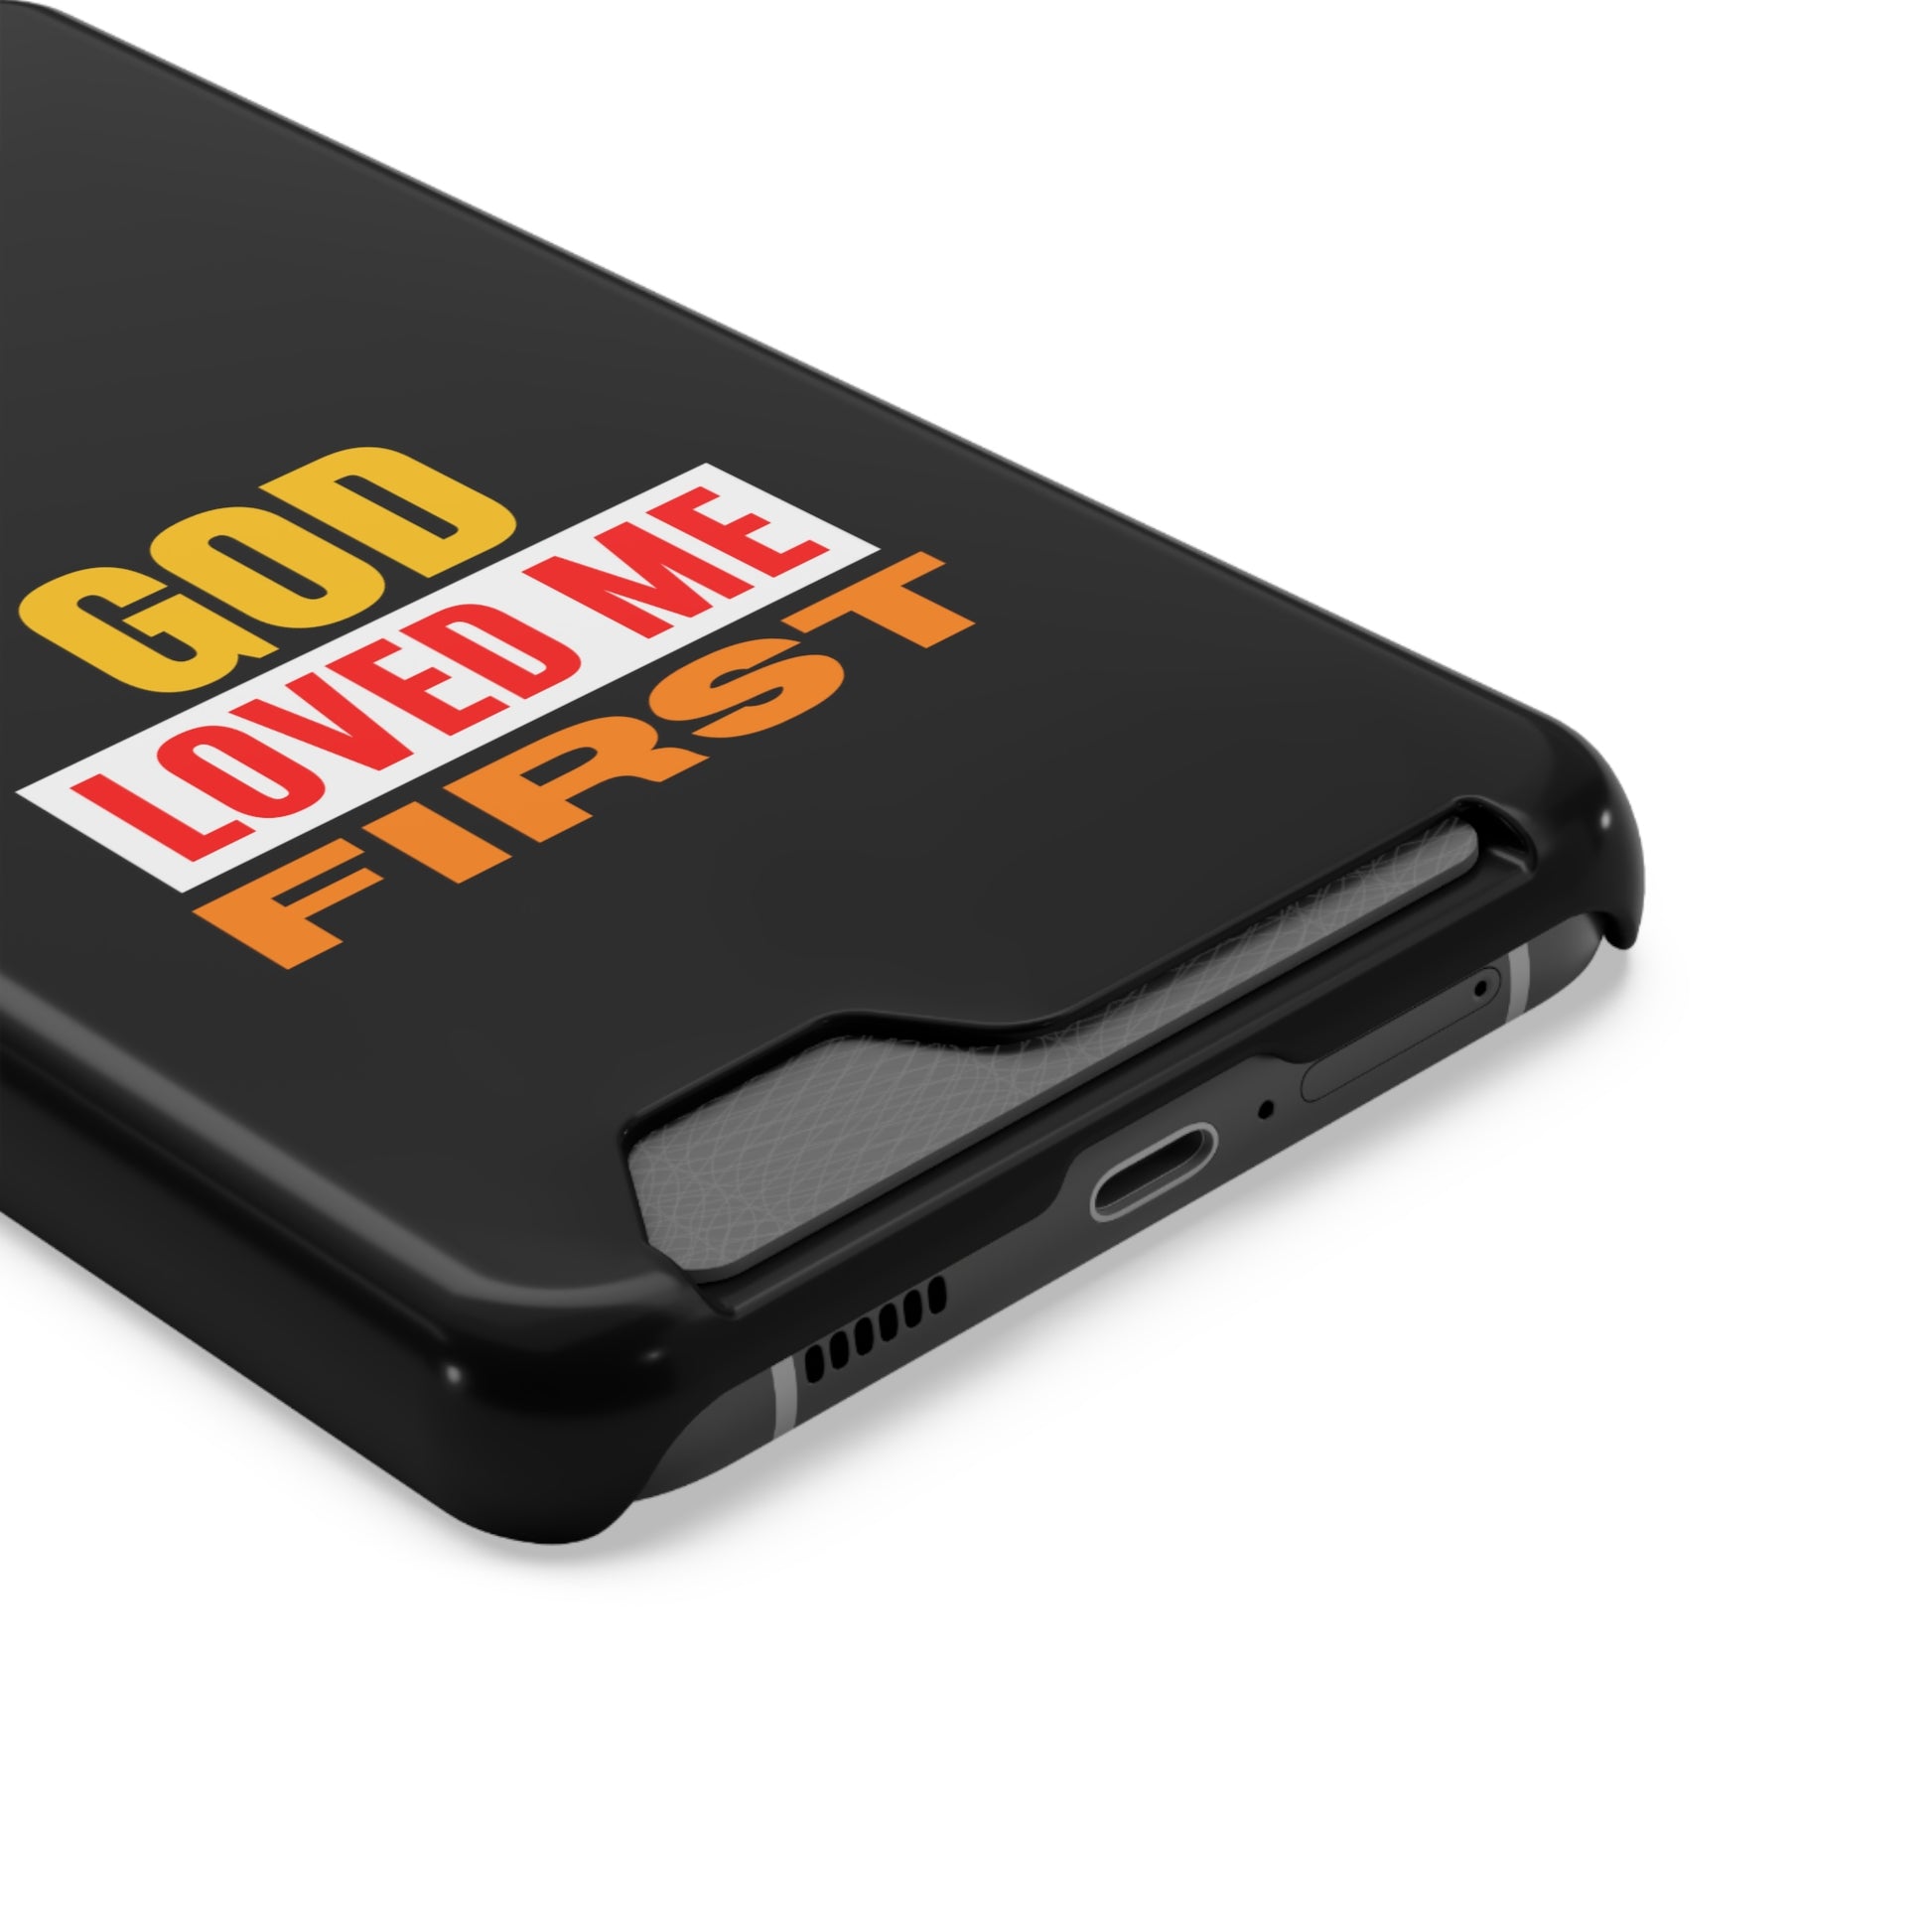 God Love Me First Christian Phone Case With Card Holder Printify